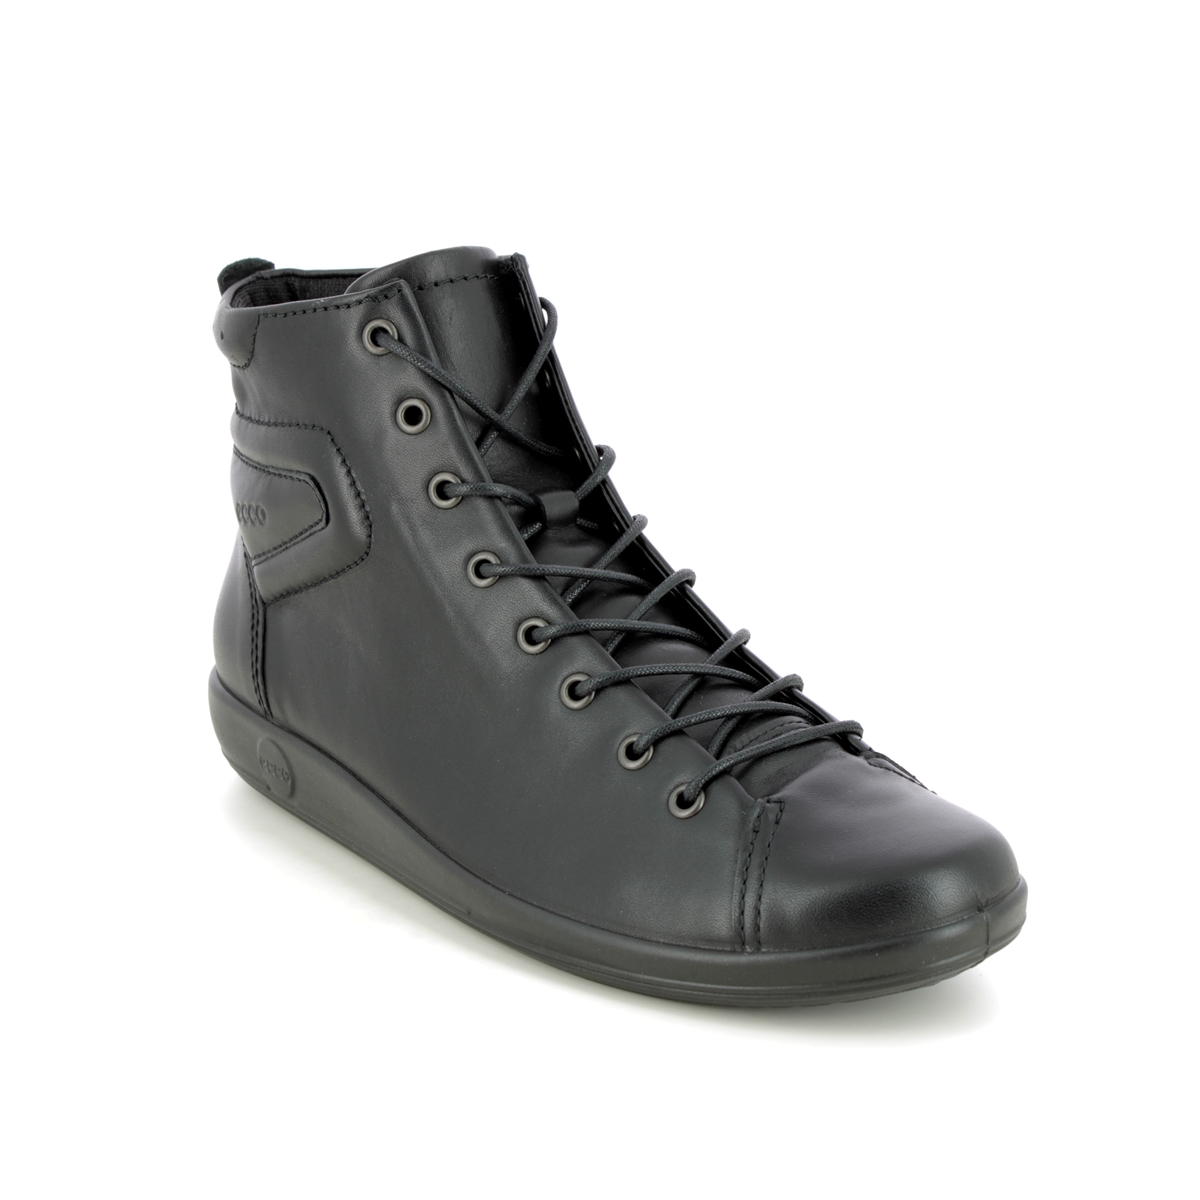 Ecco Soft 2.0 Boot Black Leather Womens Lace Up Boots 206523-56723 In Size 39 In Plain Black Leather